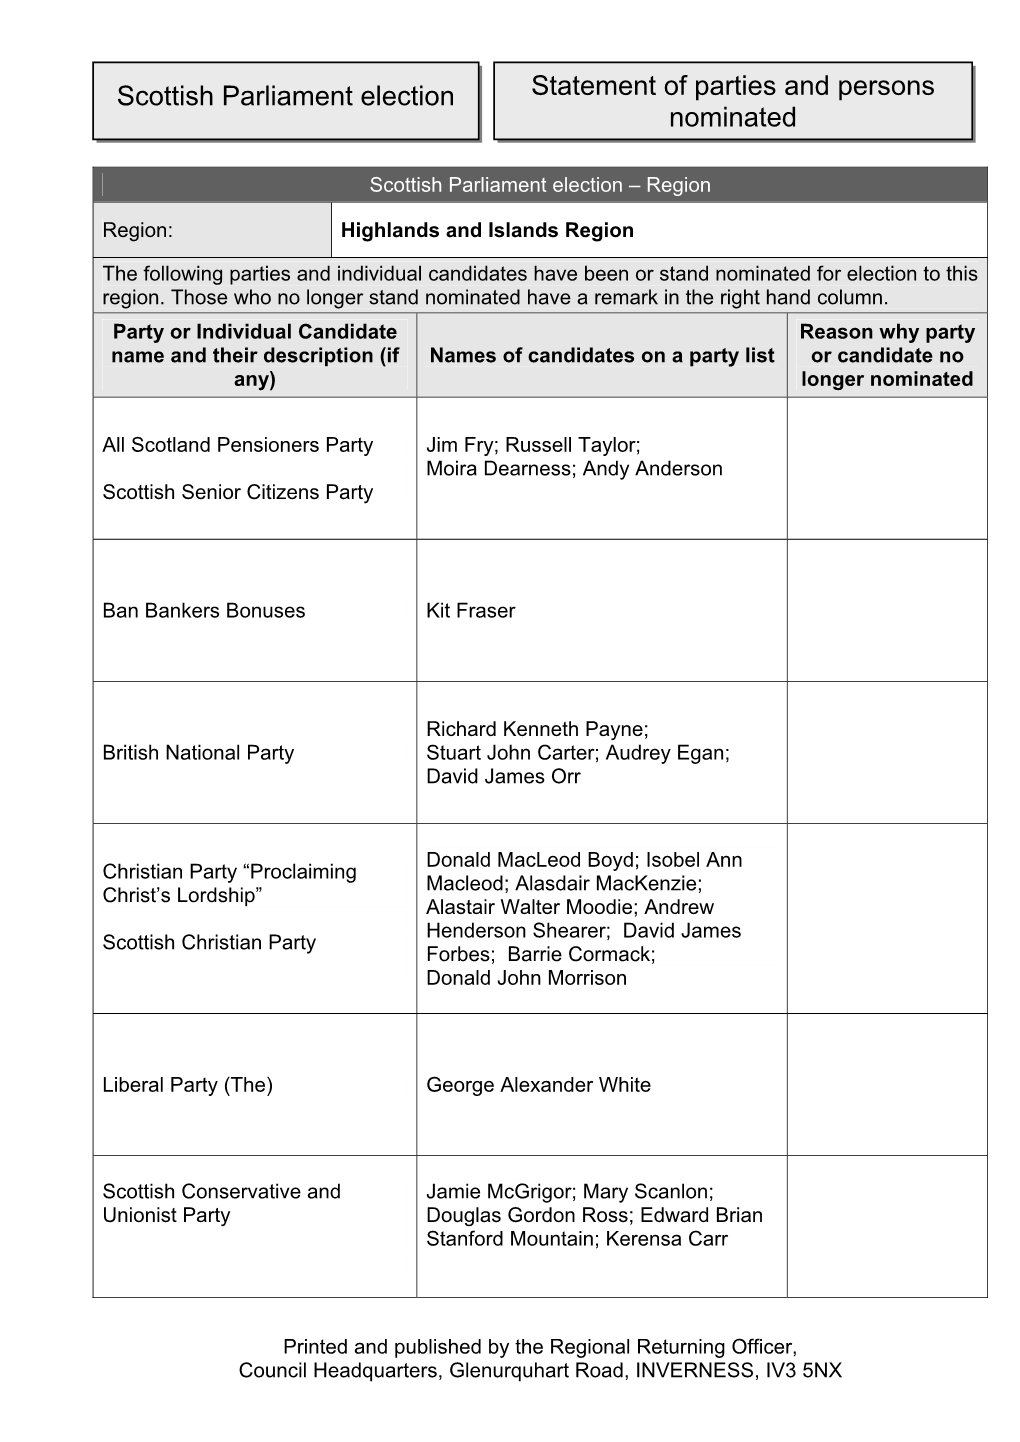 Statement of Parties and Persons Nominated Scottish Parliament